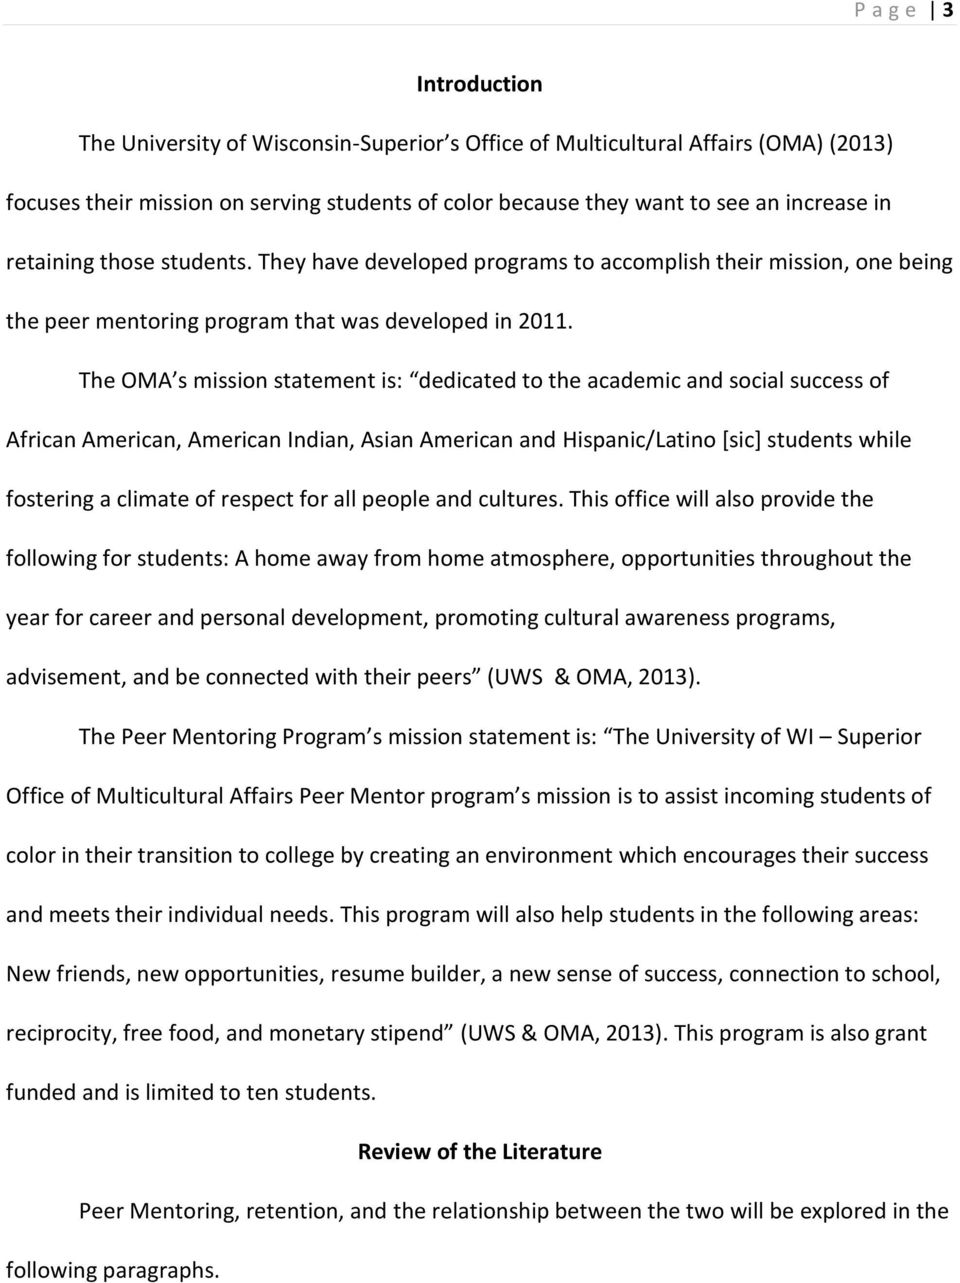 The OMA s mission statement is: dedicated to the academic and social success of African American, American Indian, Asian American and Hispanic/Latino [sic] students while fostering a climate of